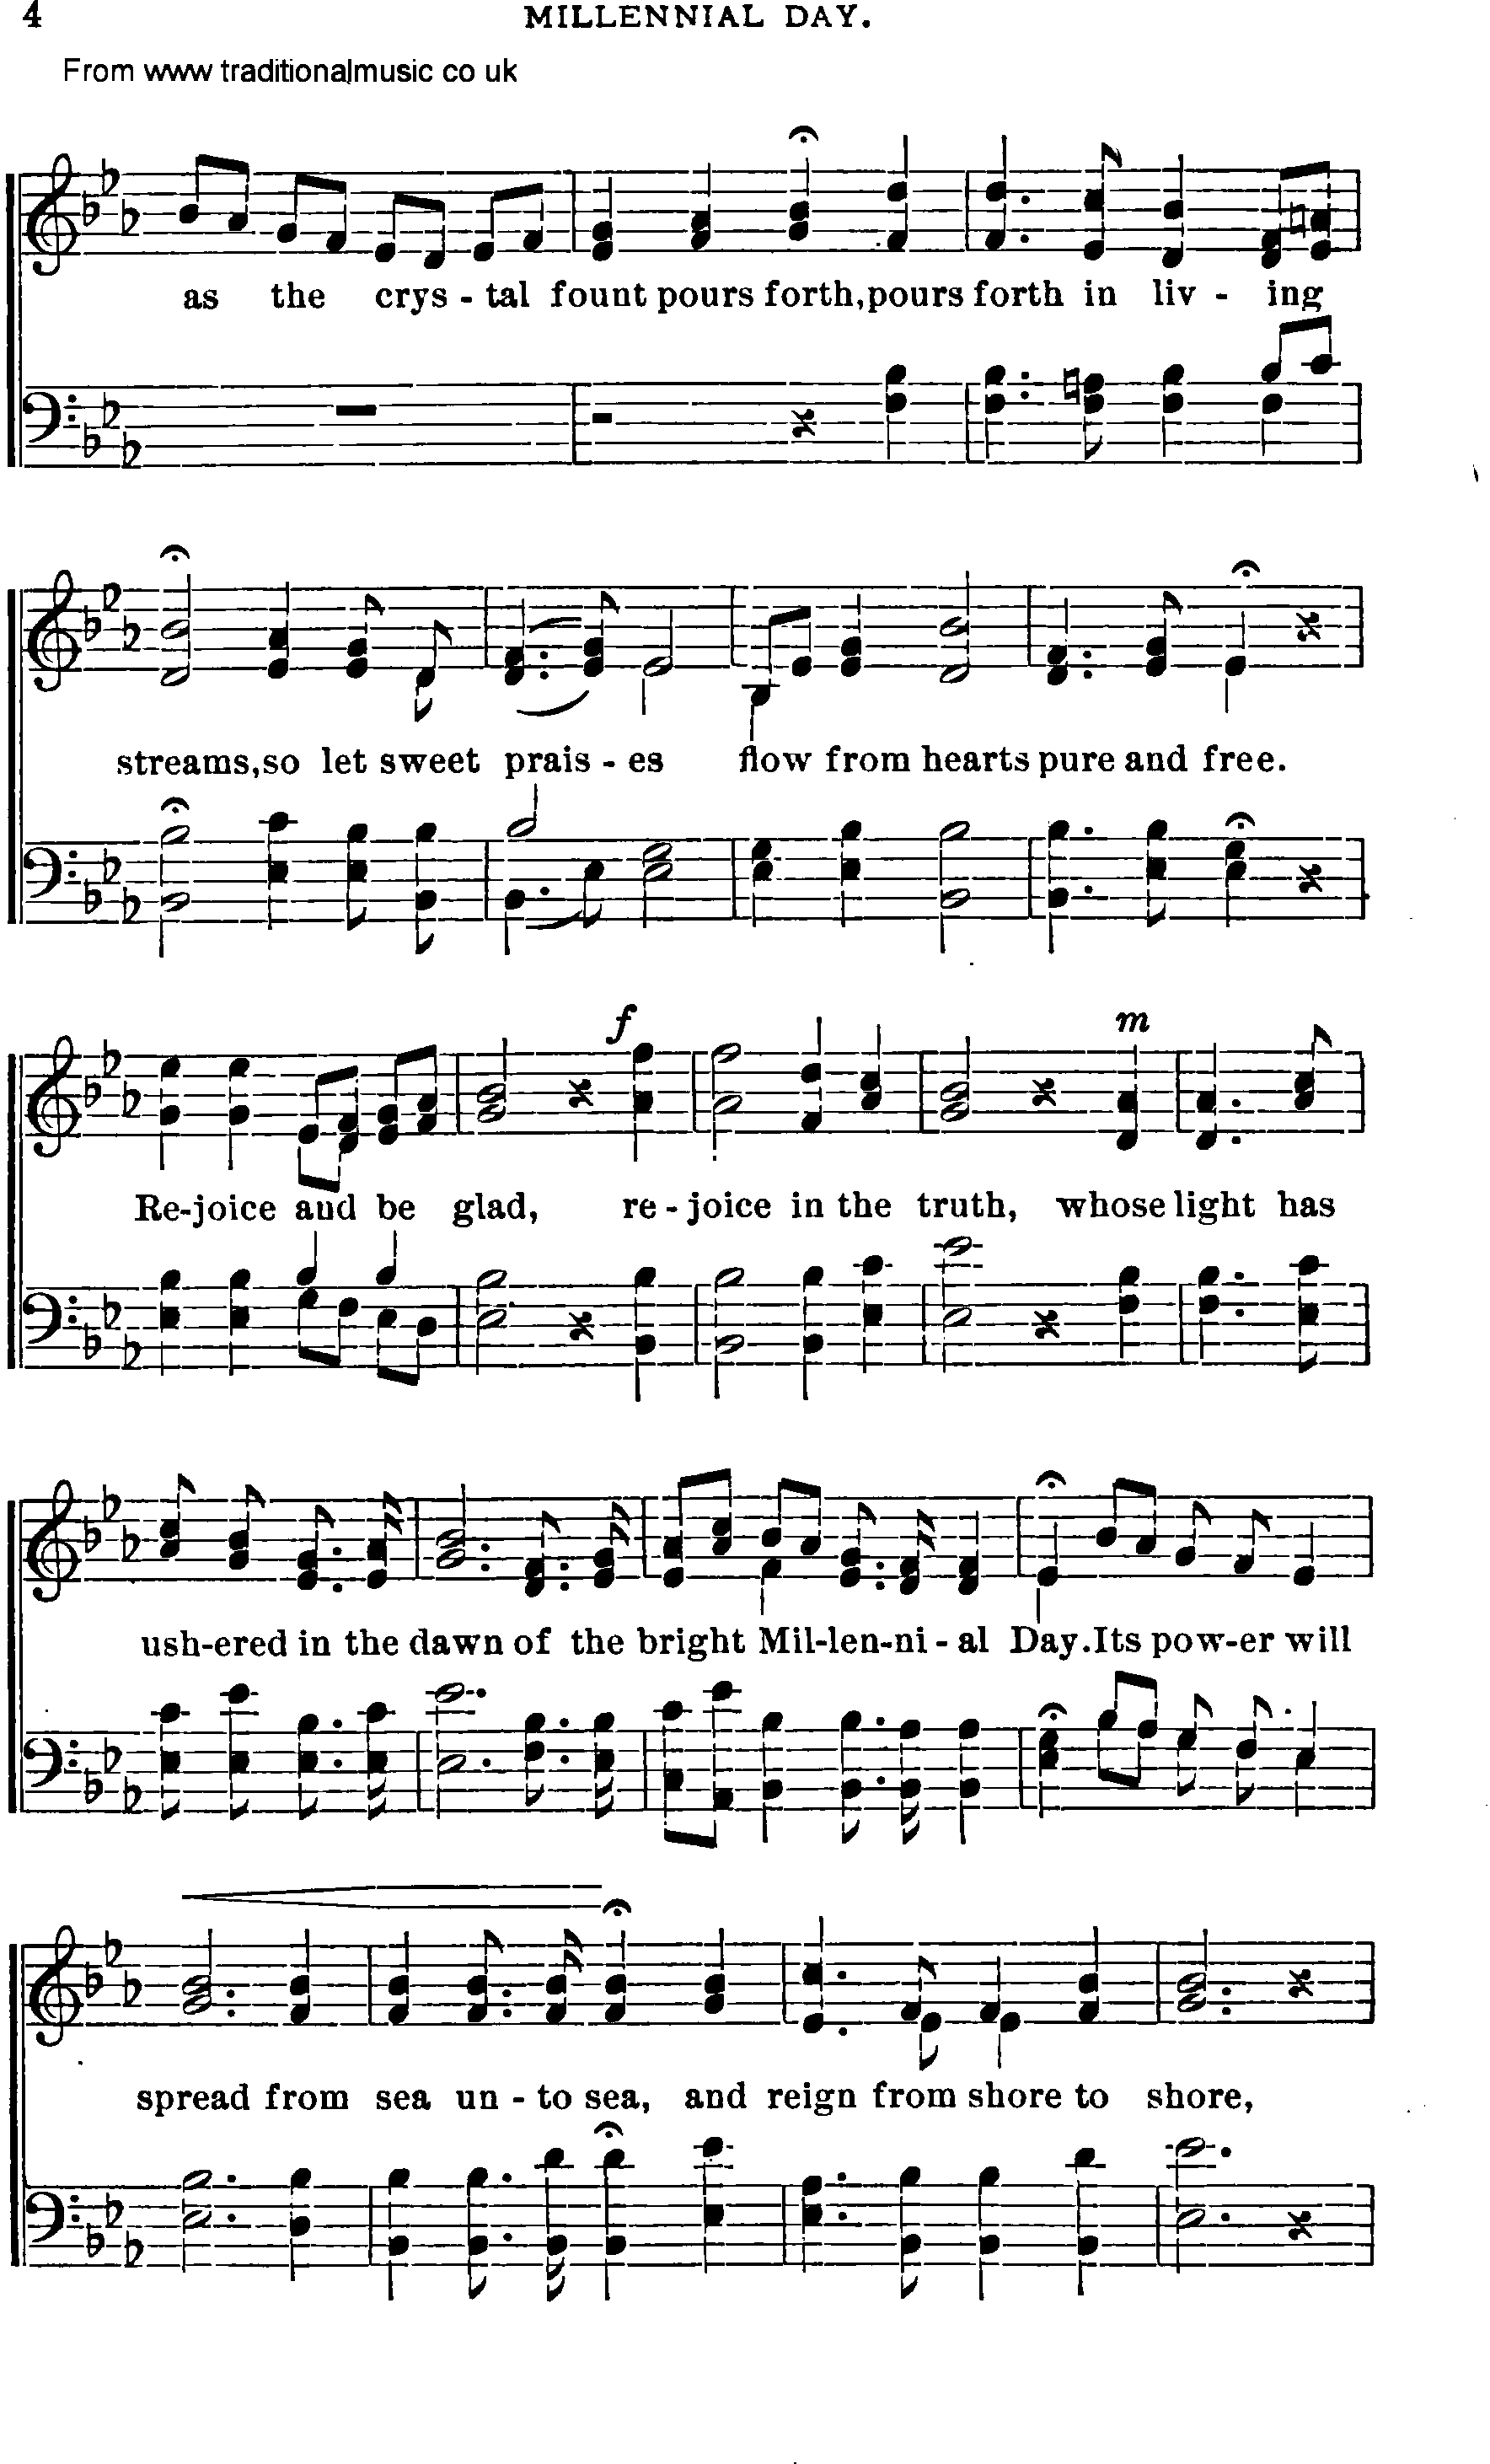 Shaker Music collection, Hymn: millenial day, sheetmusic and PDF